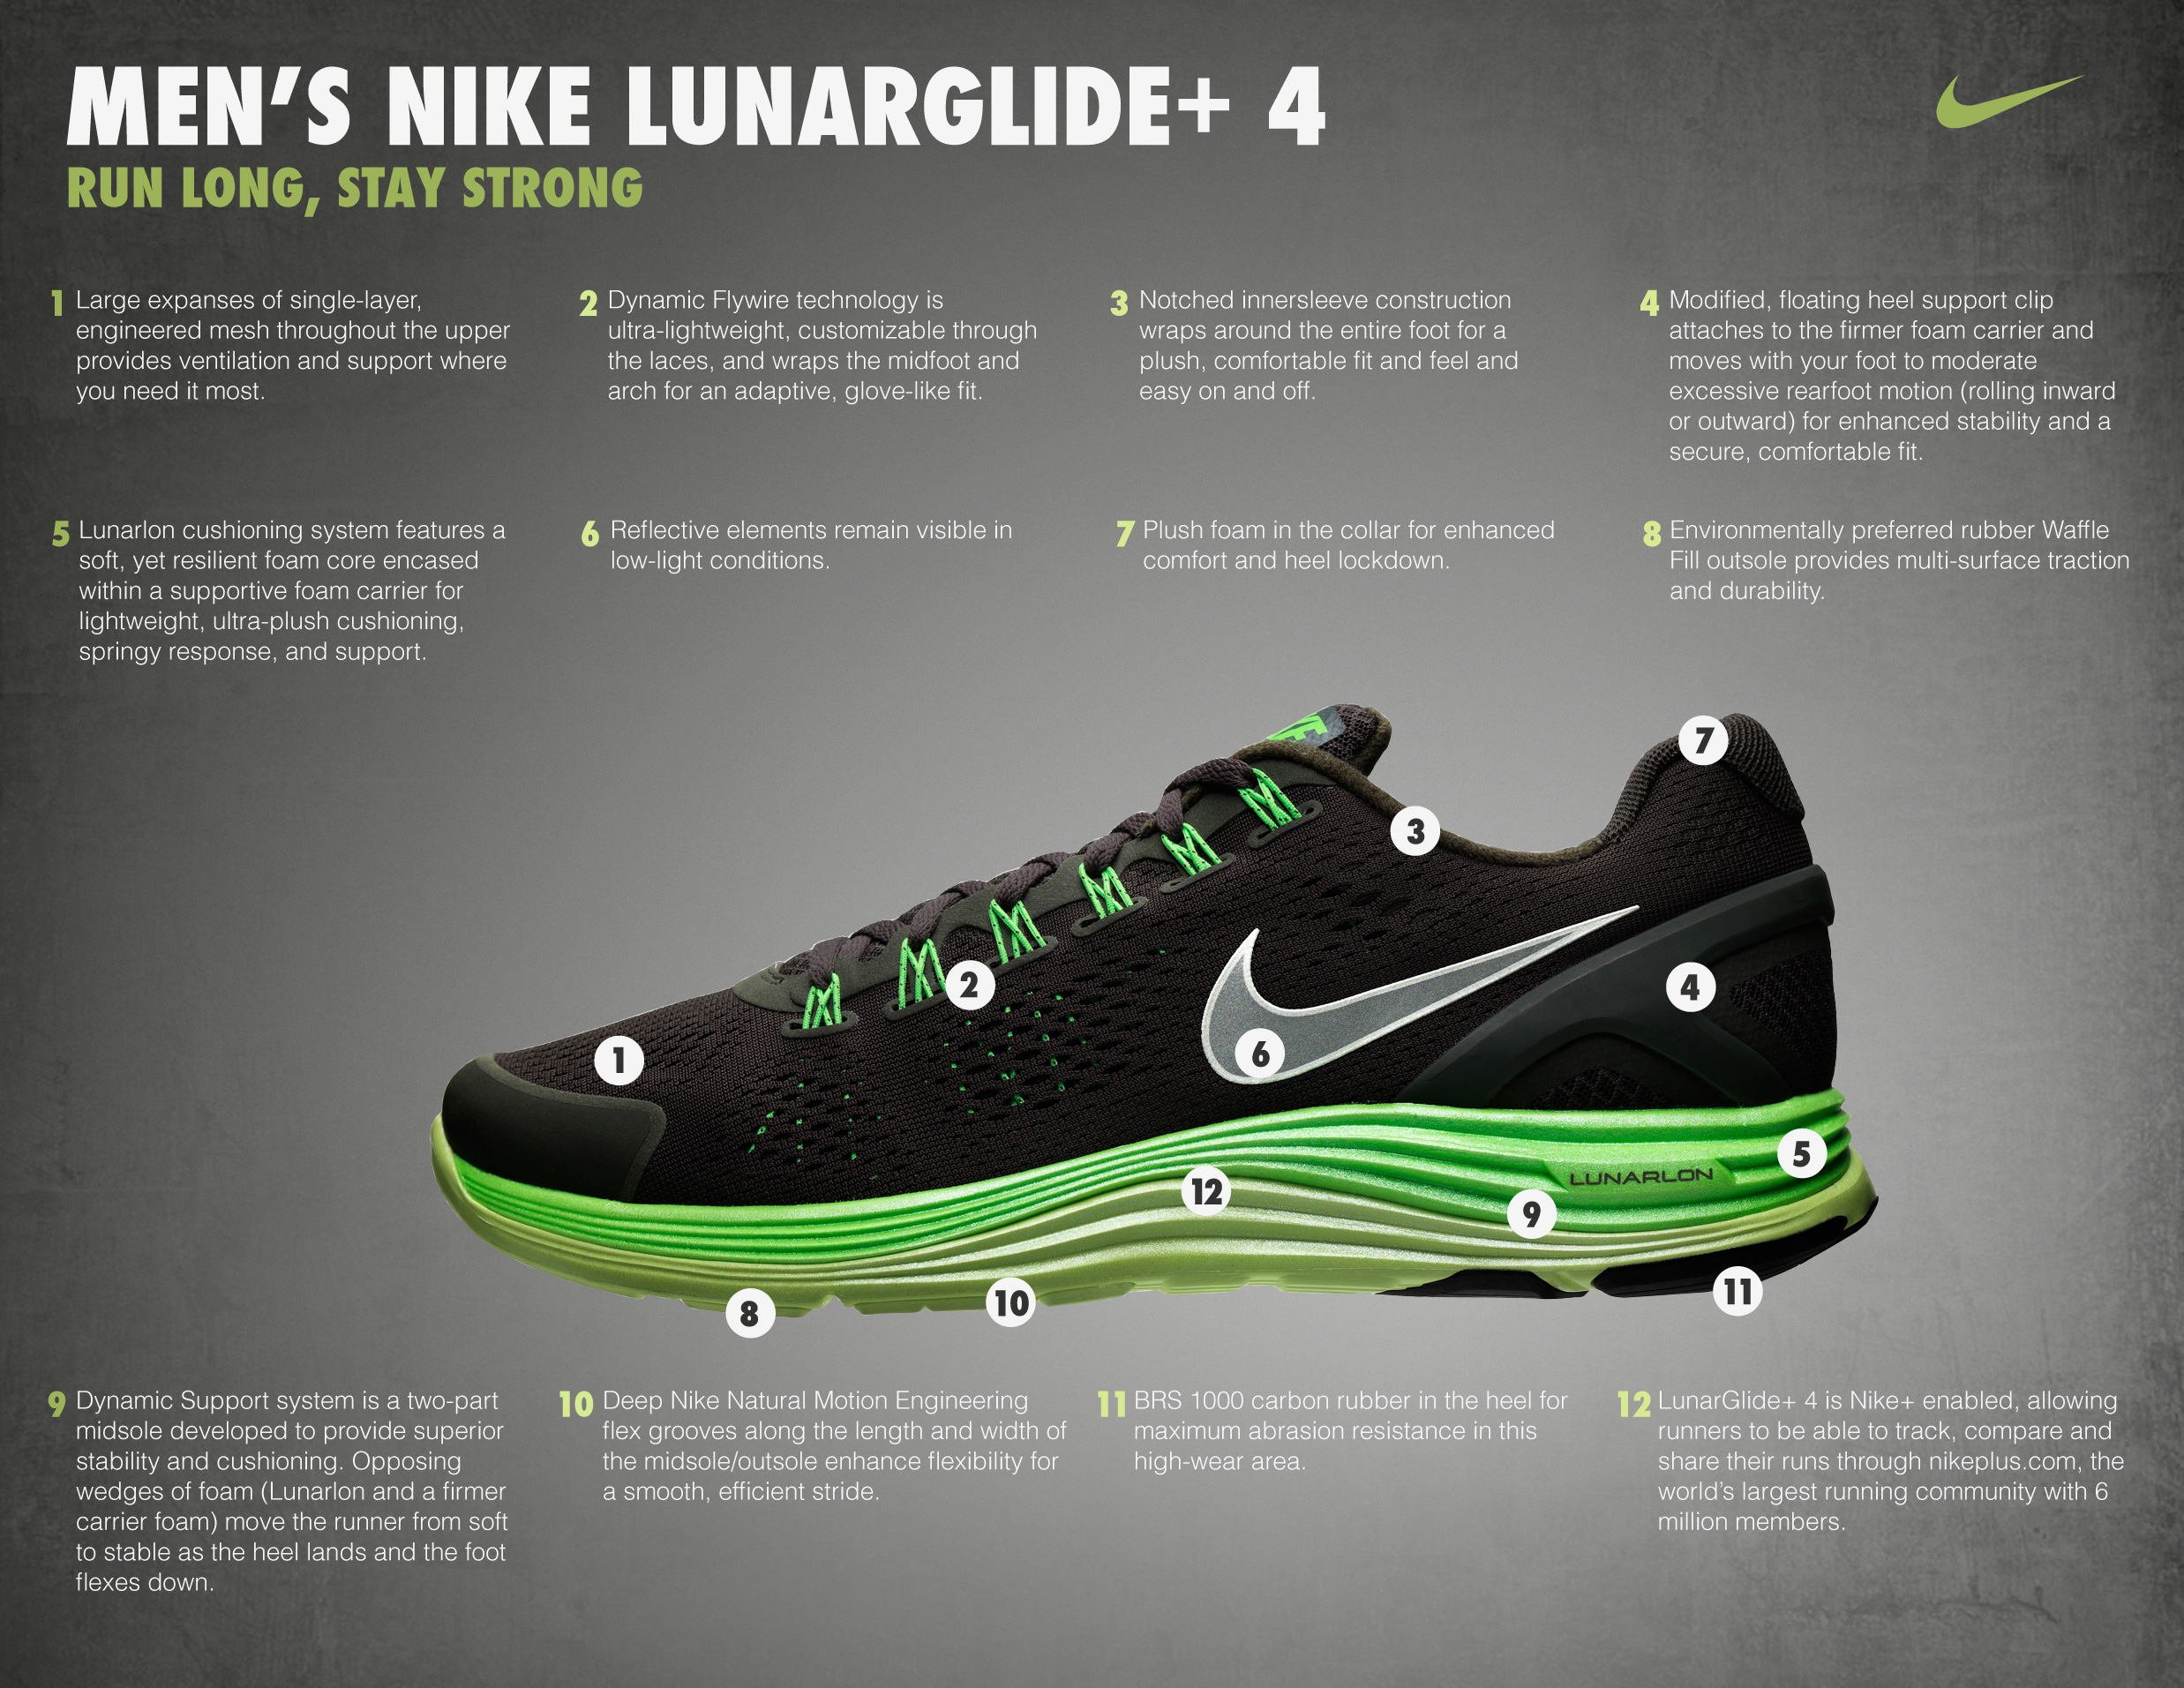 Nike LunarGlide+ 4 - the Everyday Run to an Elite | Pinoy